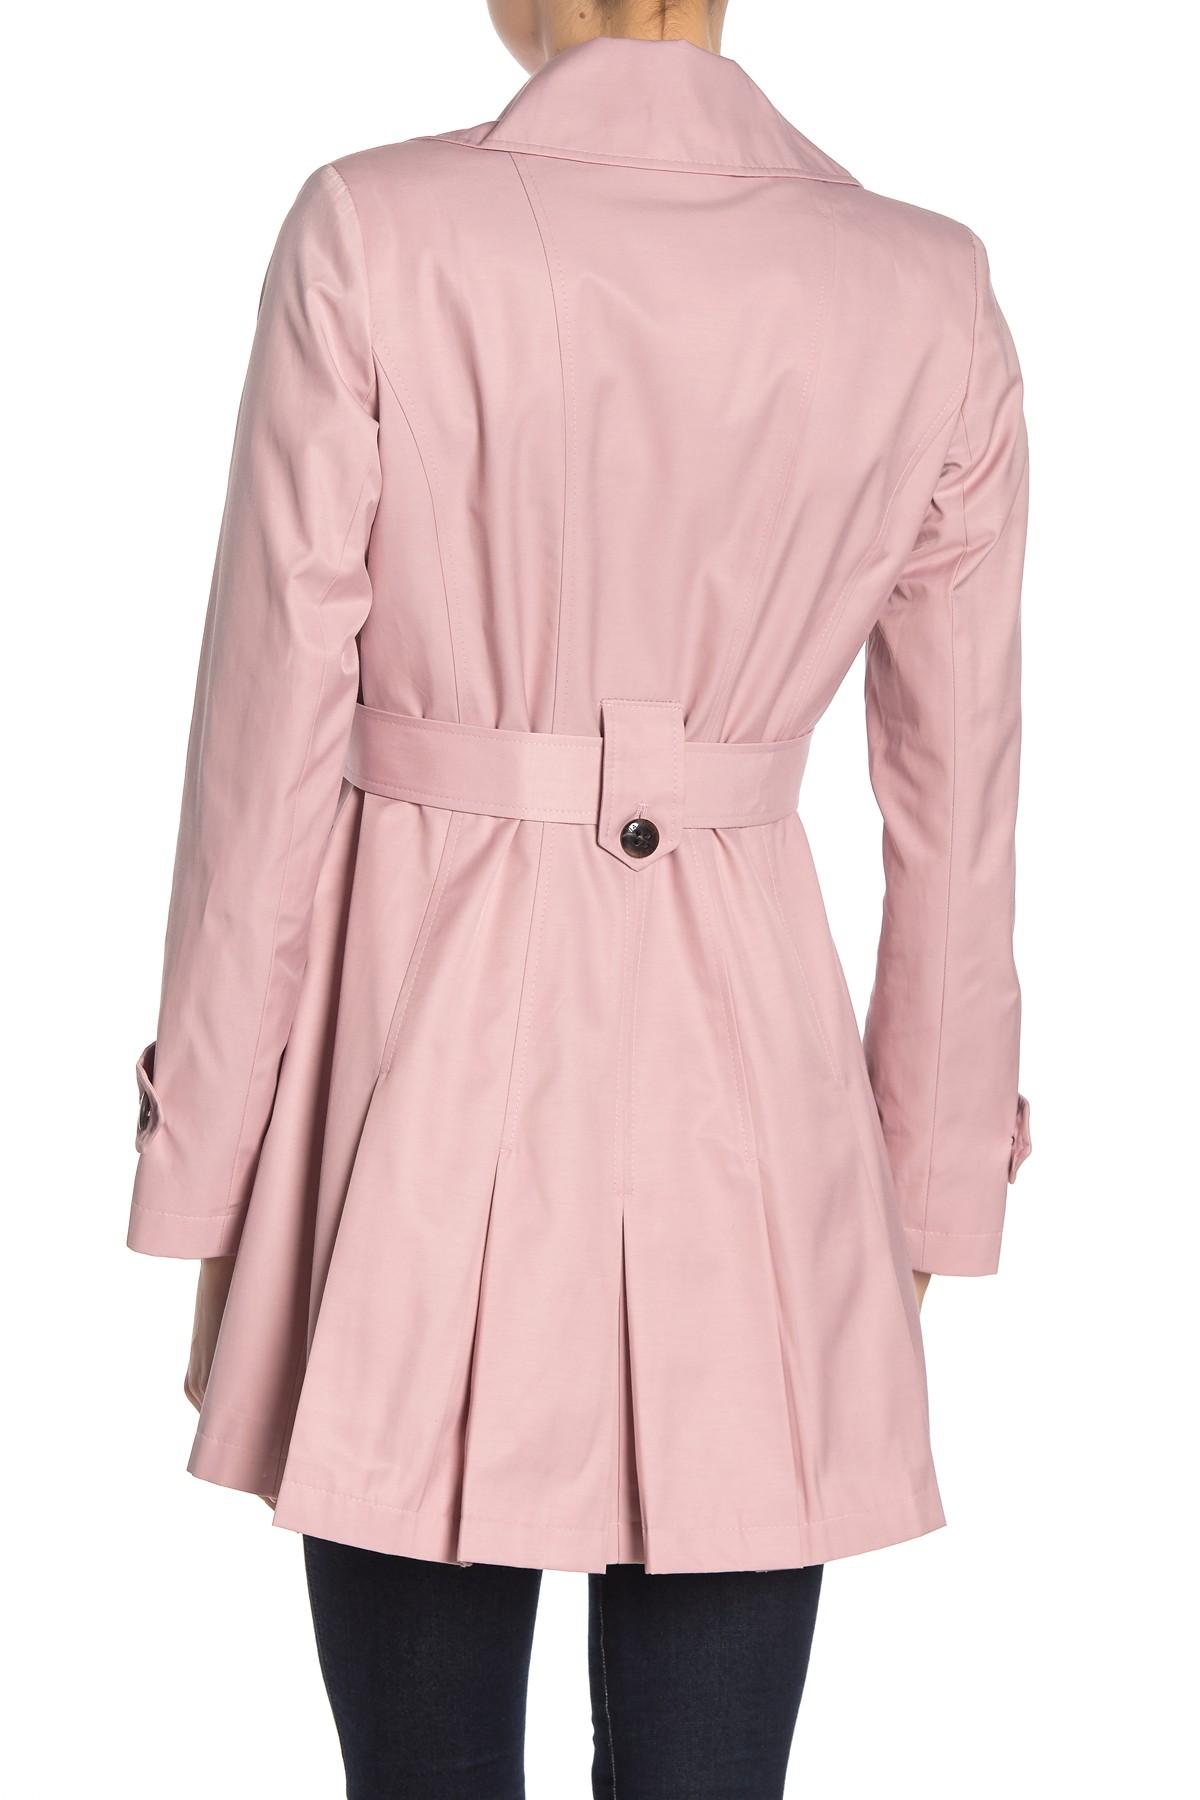 Via Spiga Synthetic Pleated Hooded Trench Coat in Pink - Lyst